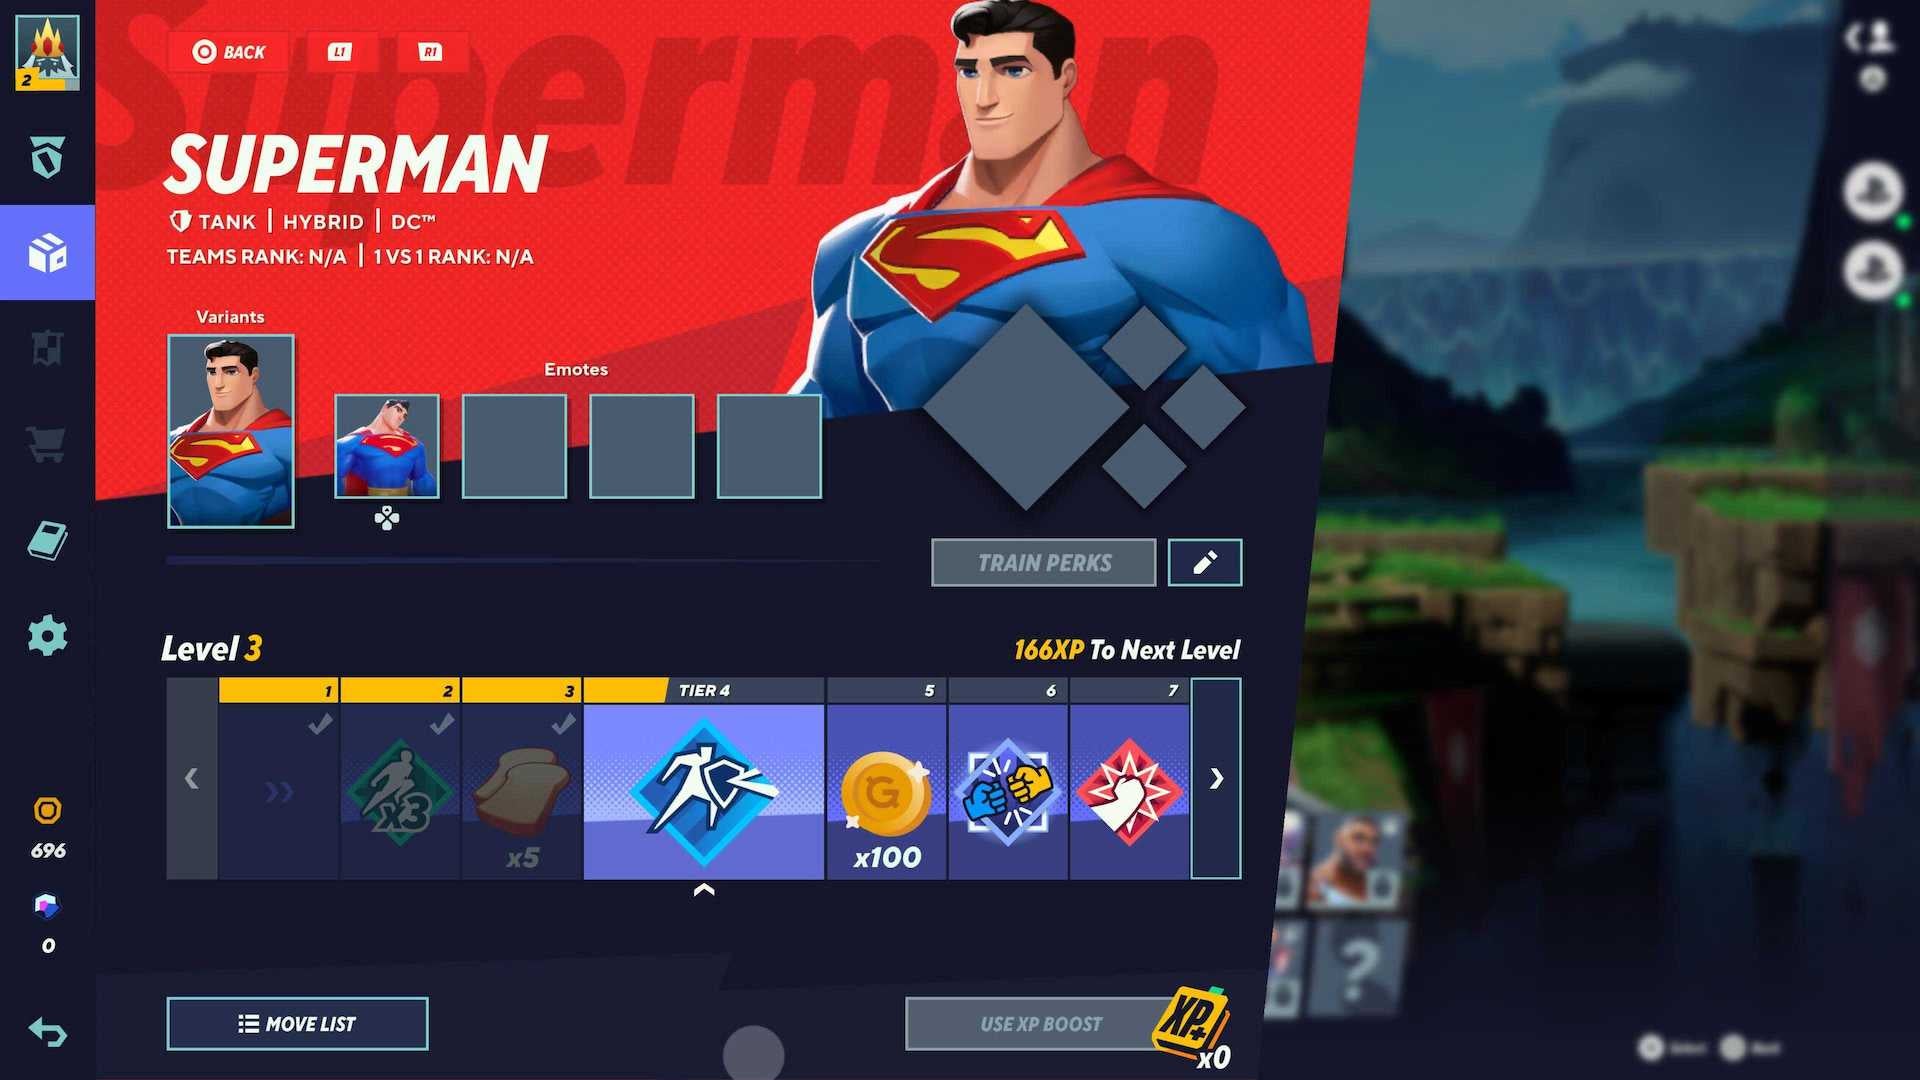 Superman's character selection screen in MultiVersus